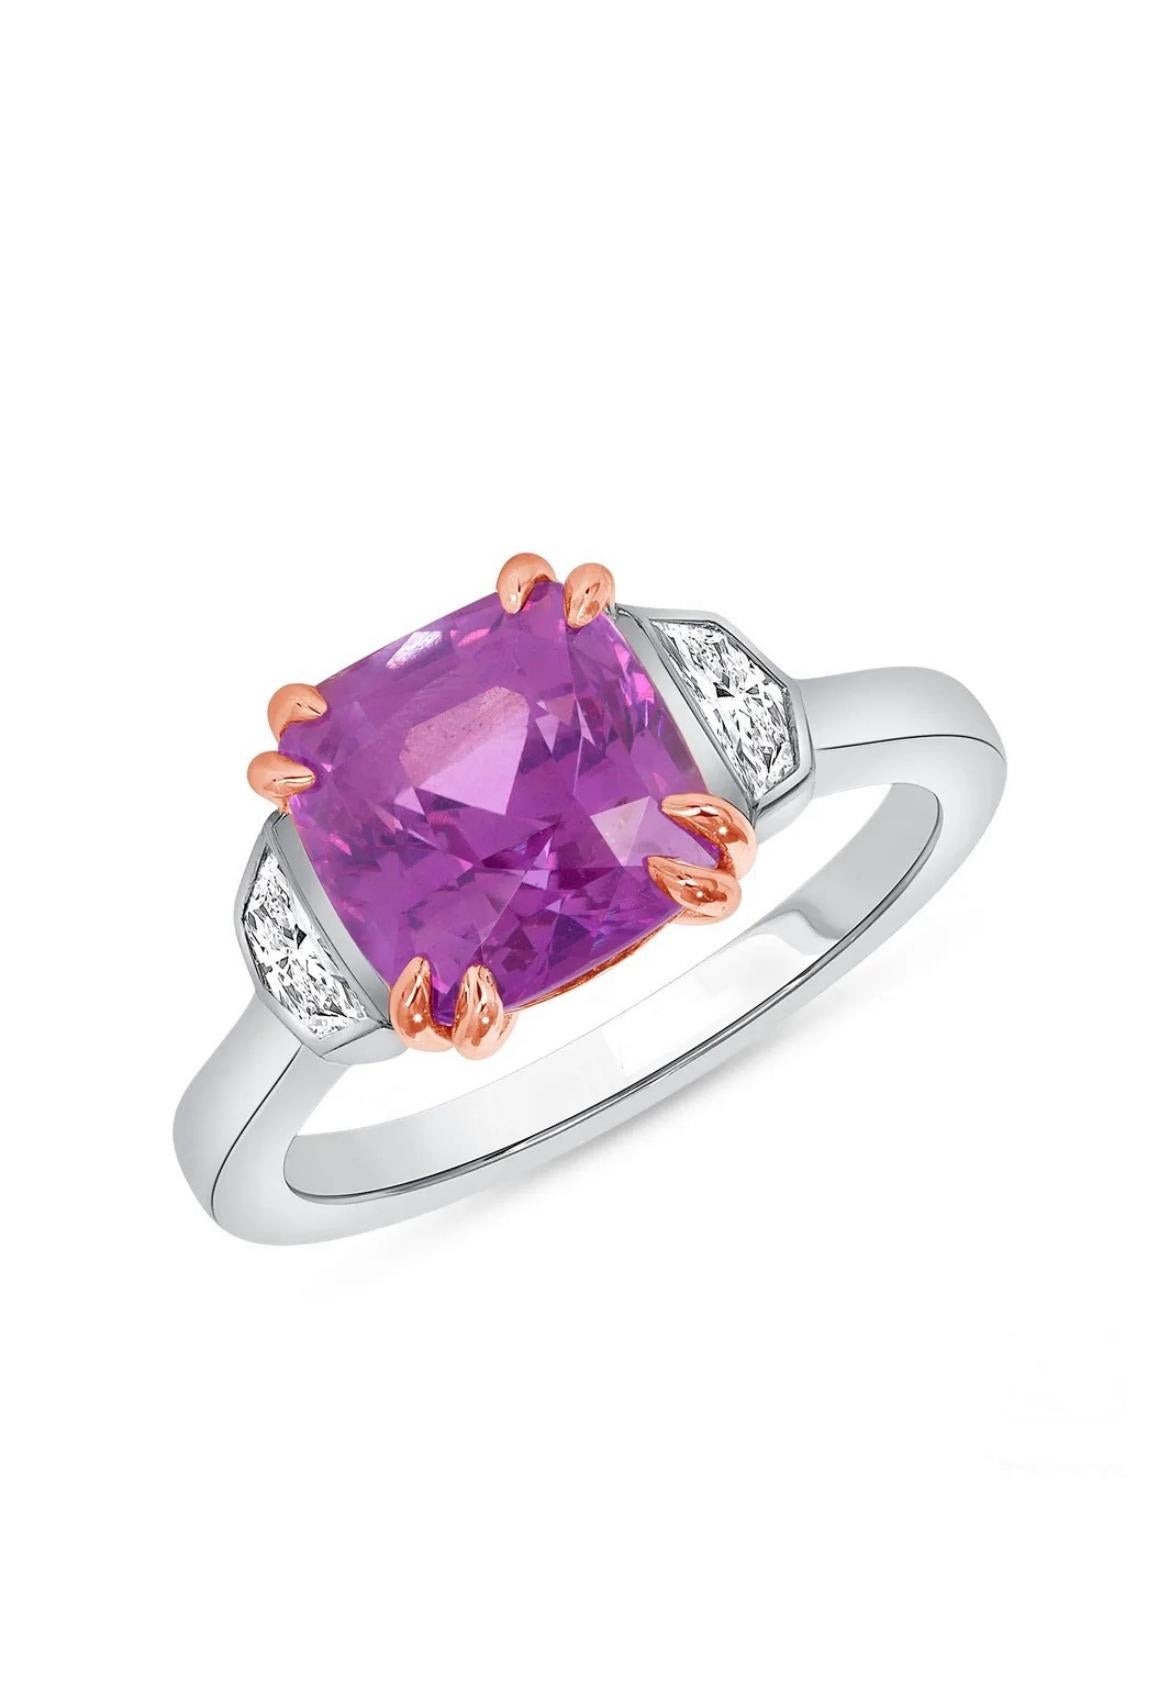 4.72ct untreated cushion-cut Pink Sapphire ring. GIA certified. For Sale